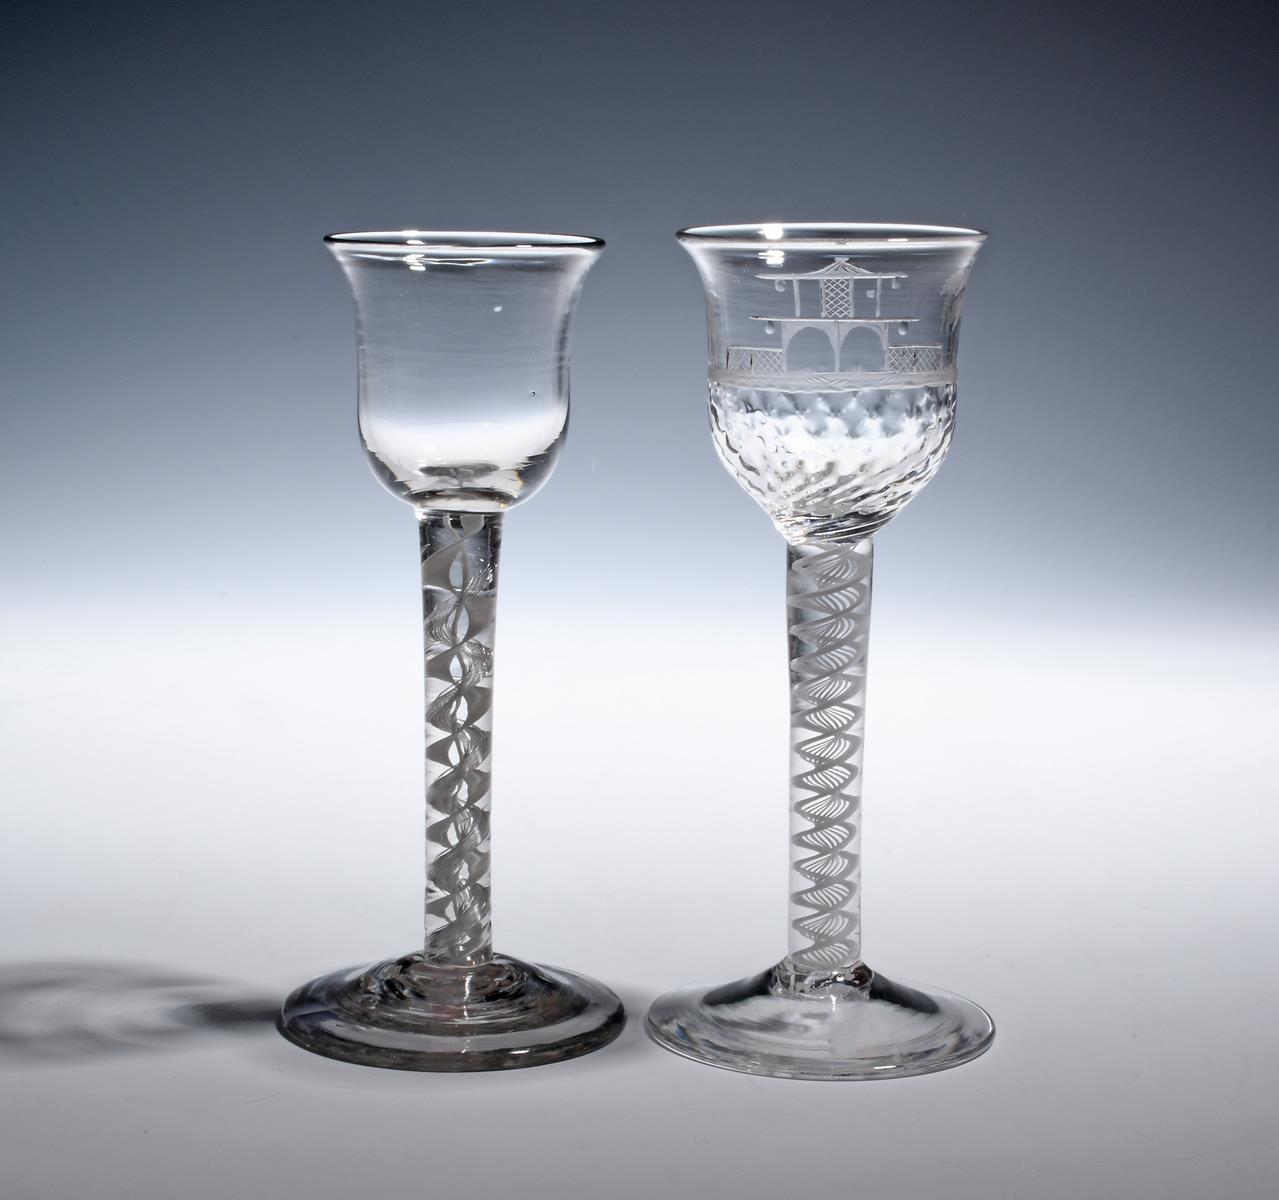 Two wine glasses c.1760, one with a moulded bell bowl engraved with chinoiserie decoration of a